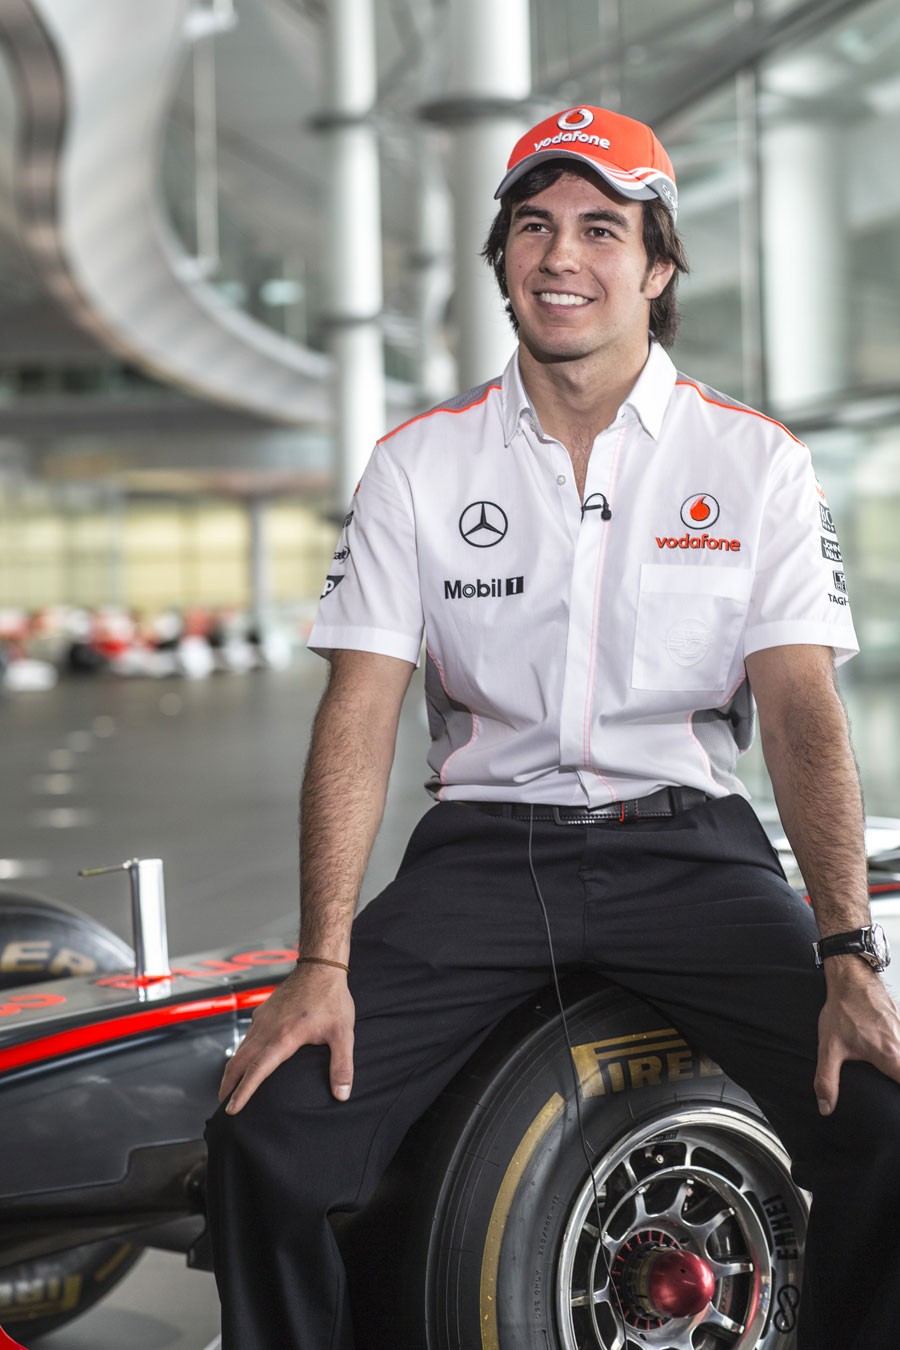 Sergio Perez faces the press on his first day at McLaren